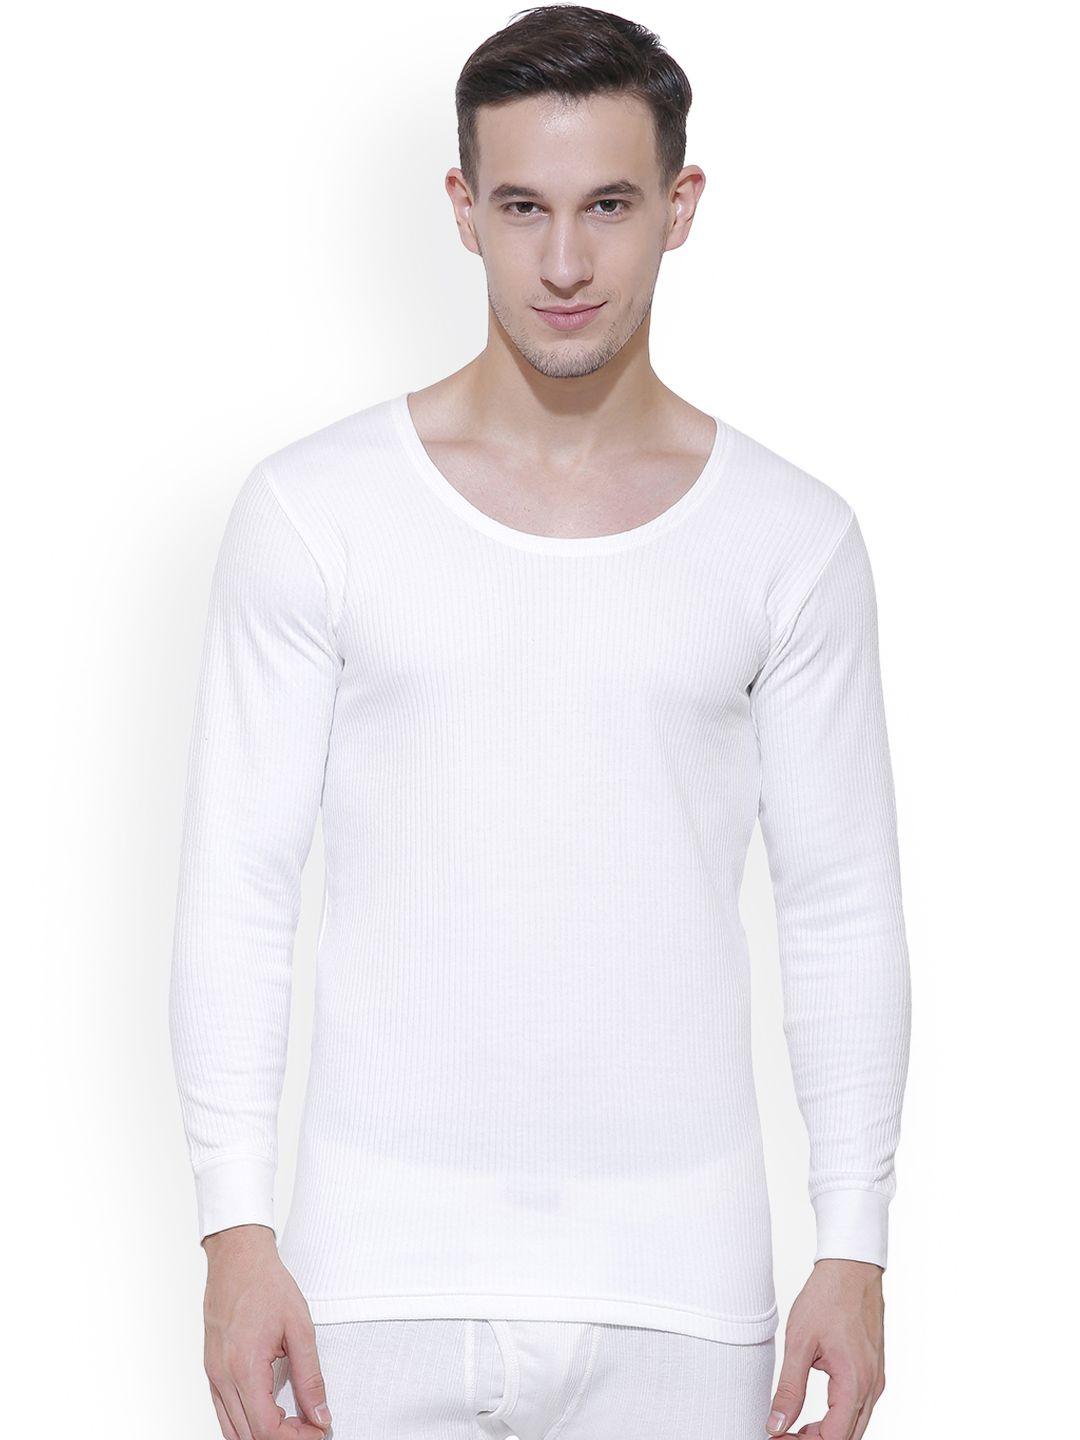 bodycare-insider-men-off-white-solid-thermal-top-b101_95